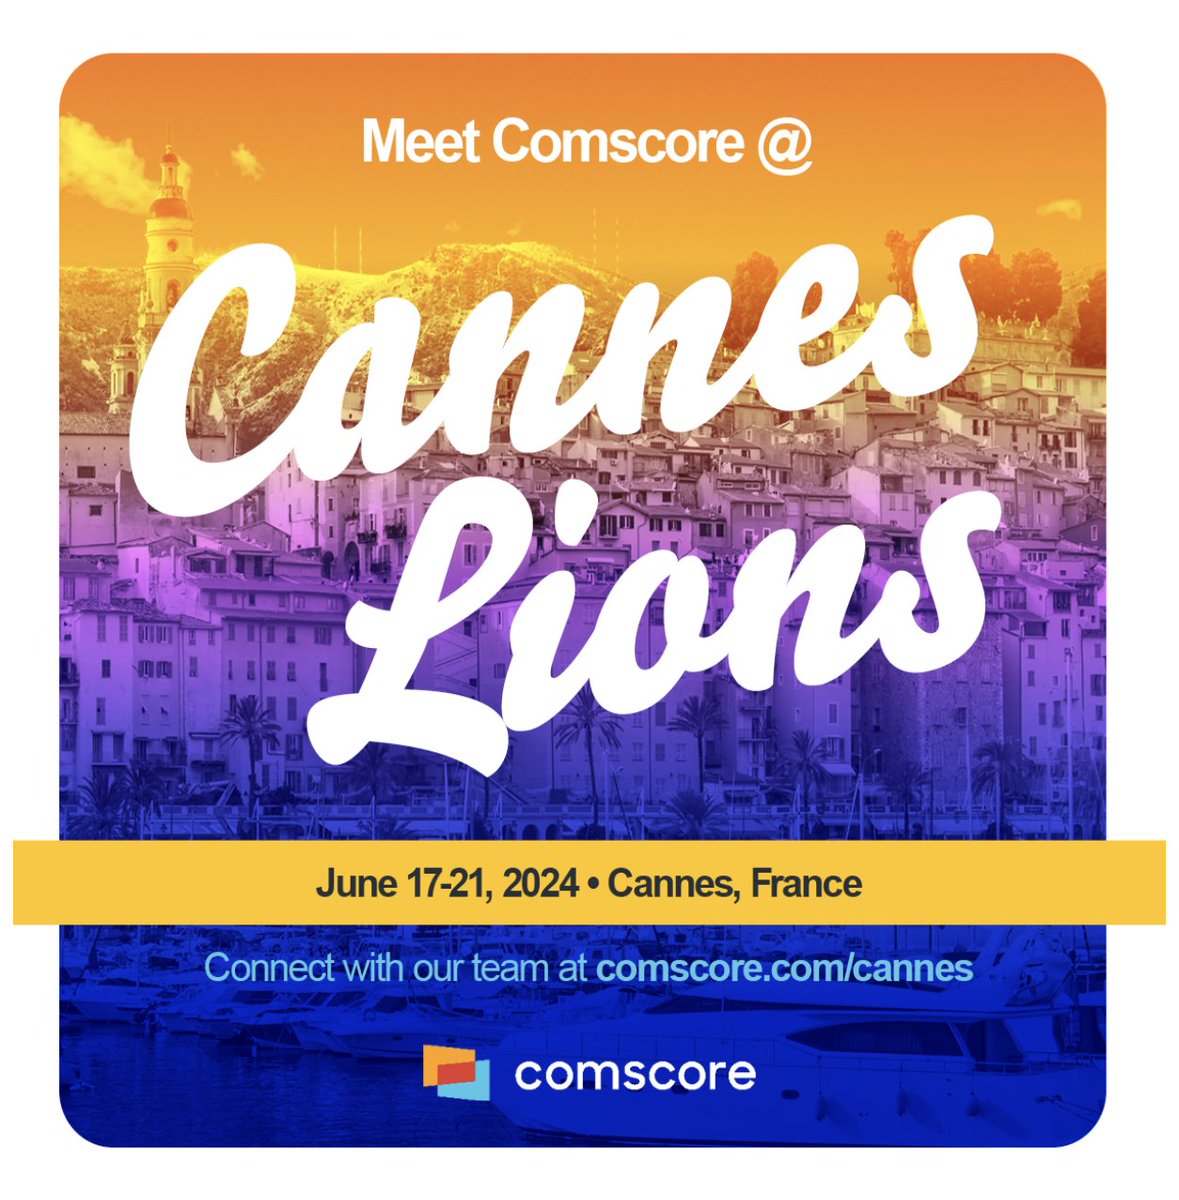 Meet us in Cannes! 🌴 The Comscore team in Cannes this year will include thought leaders from Proximic by Comscore and Comscore’s flagship cross platform solution, CCR.